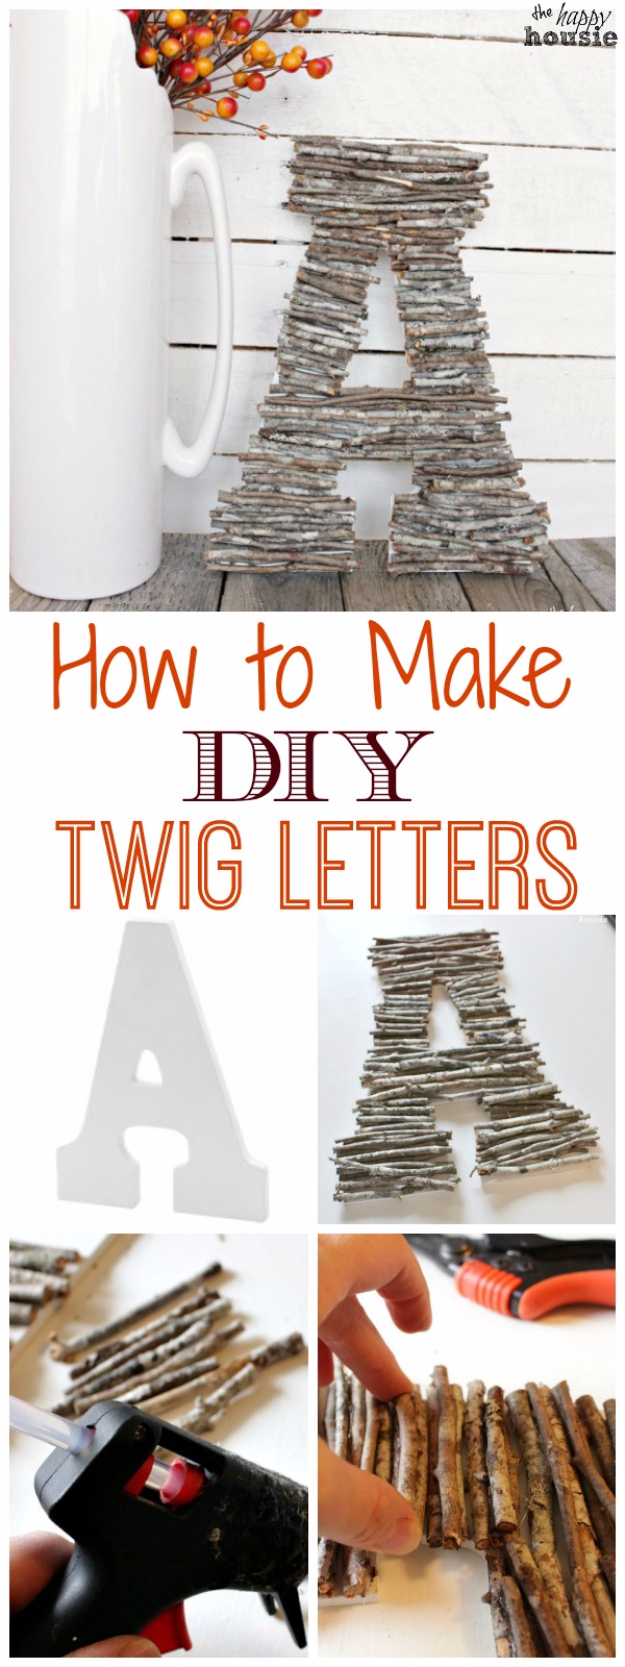 DIY Wall Letters and Initals Wall Art - DIY Twig Letters - Cool Architectural Letter Projects for Living Room Decor, Bedroom Ideas. Girl or Boy Nursery. Paint, Glitter, String Art, Easy Cardboard and Rustic Wooden Ideas 